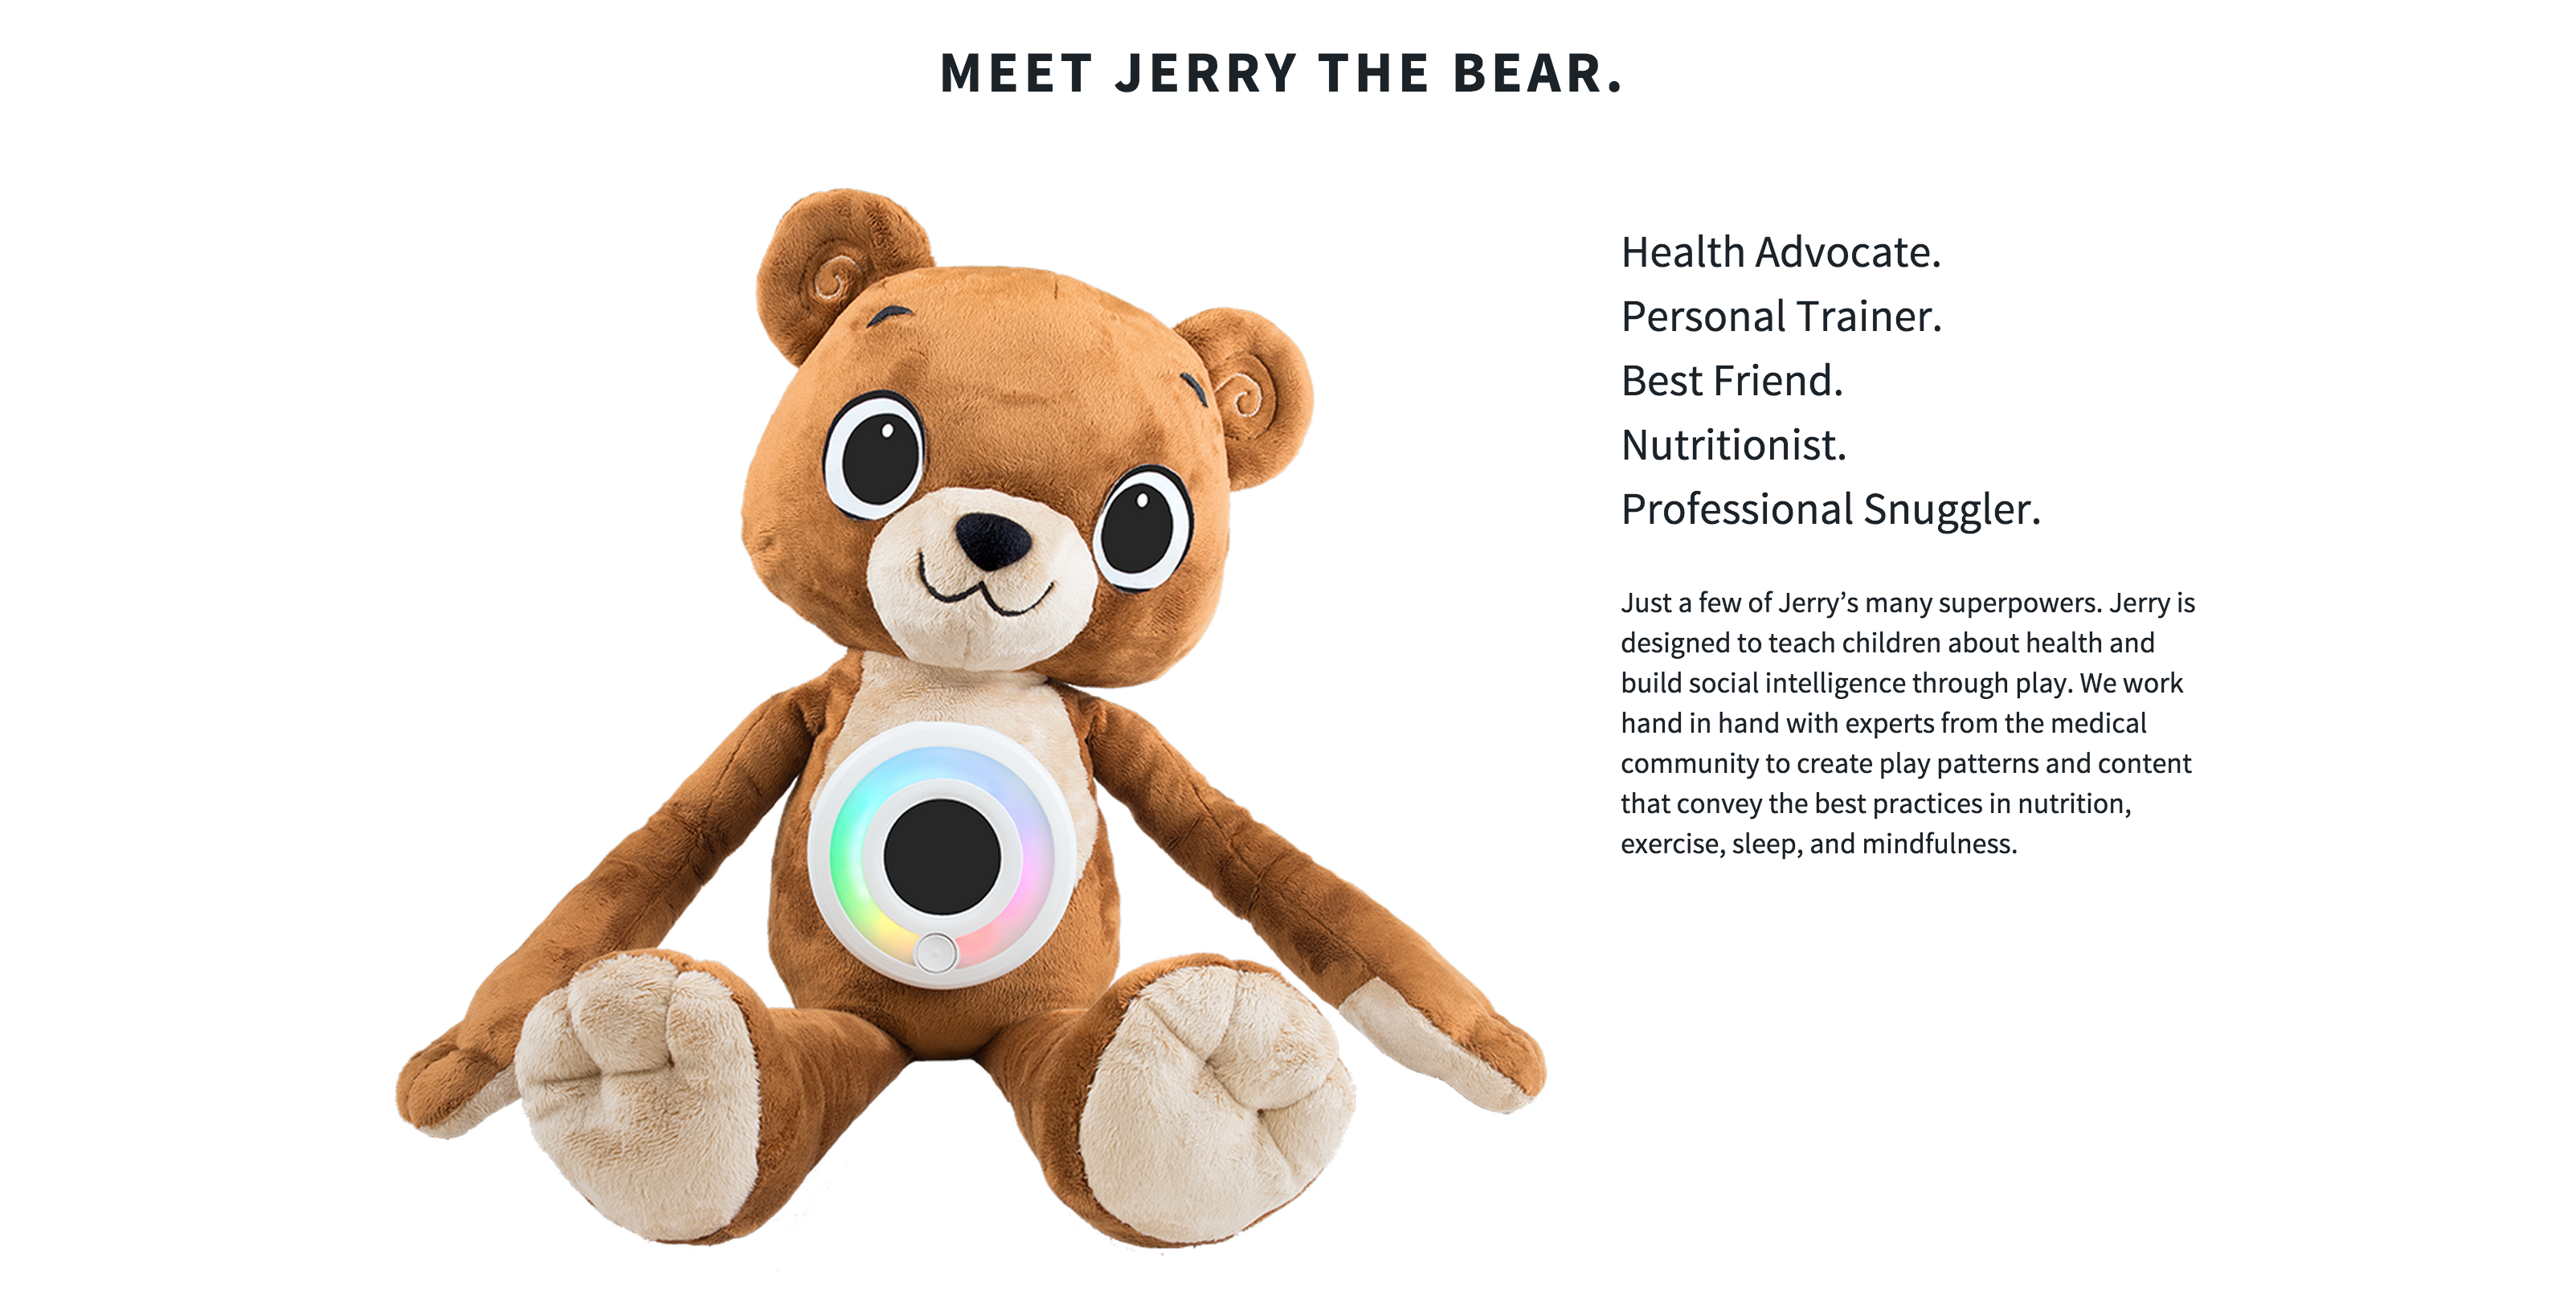 Jerry the Bear - One Bear. Many superpowers